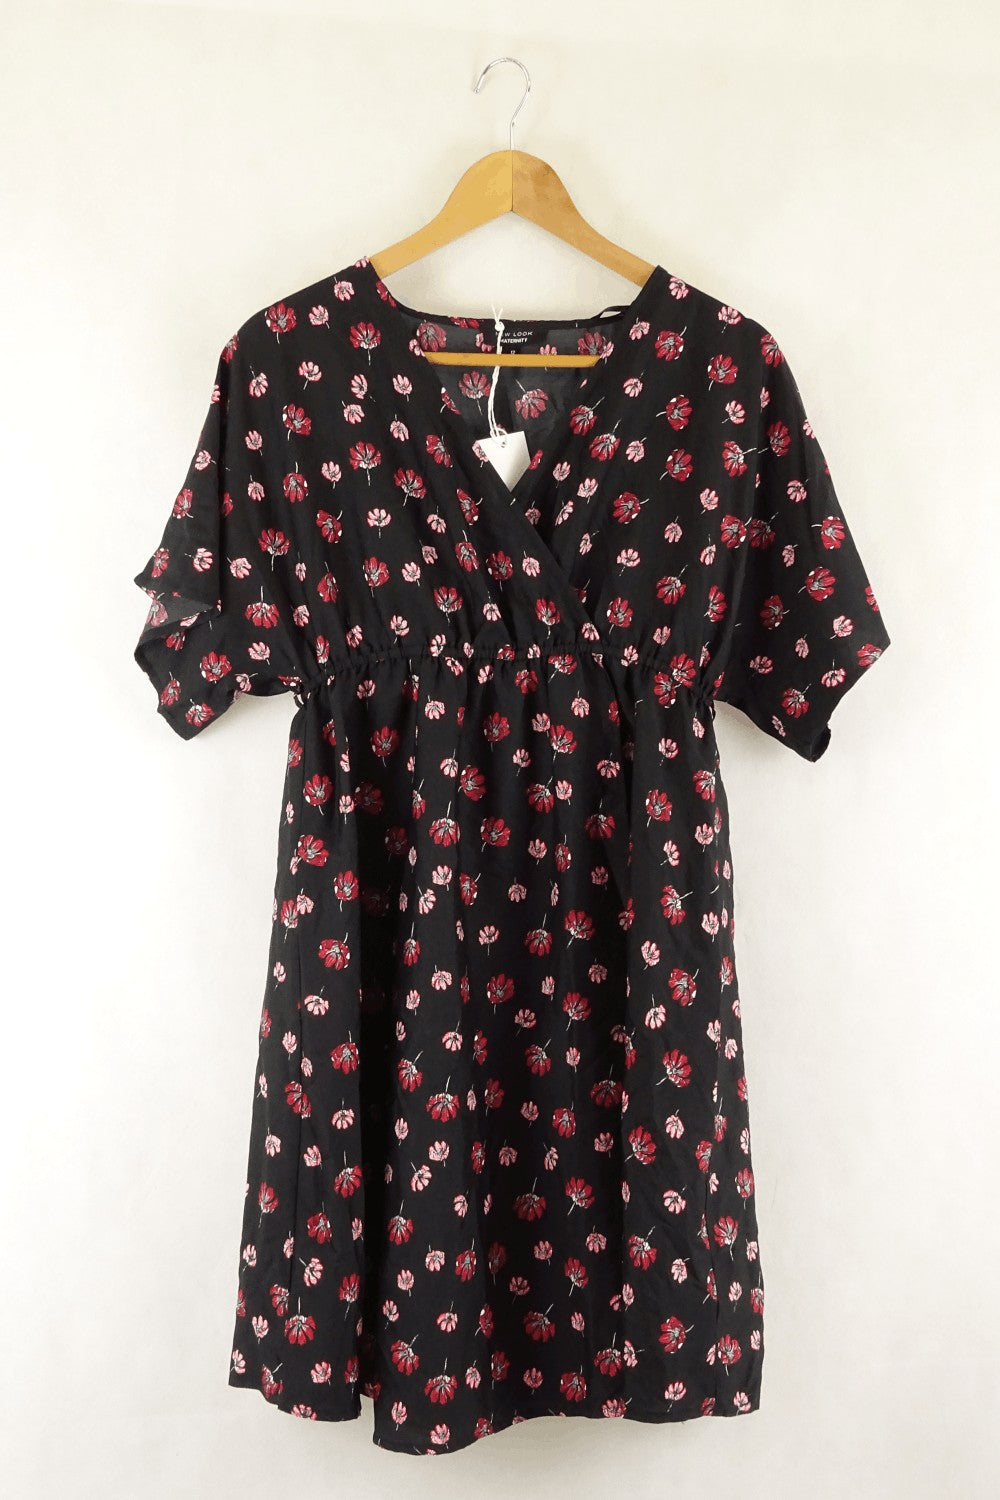 New Look Black And Red Floral Dress 12